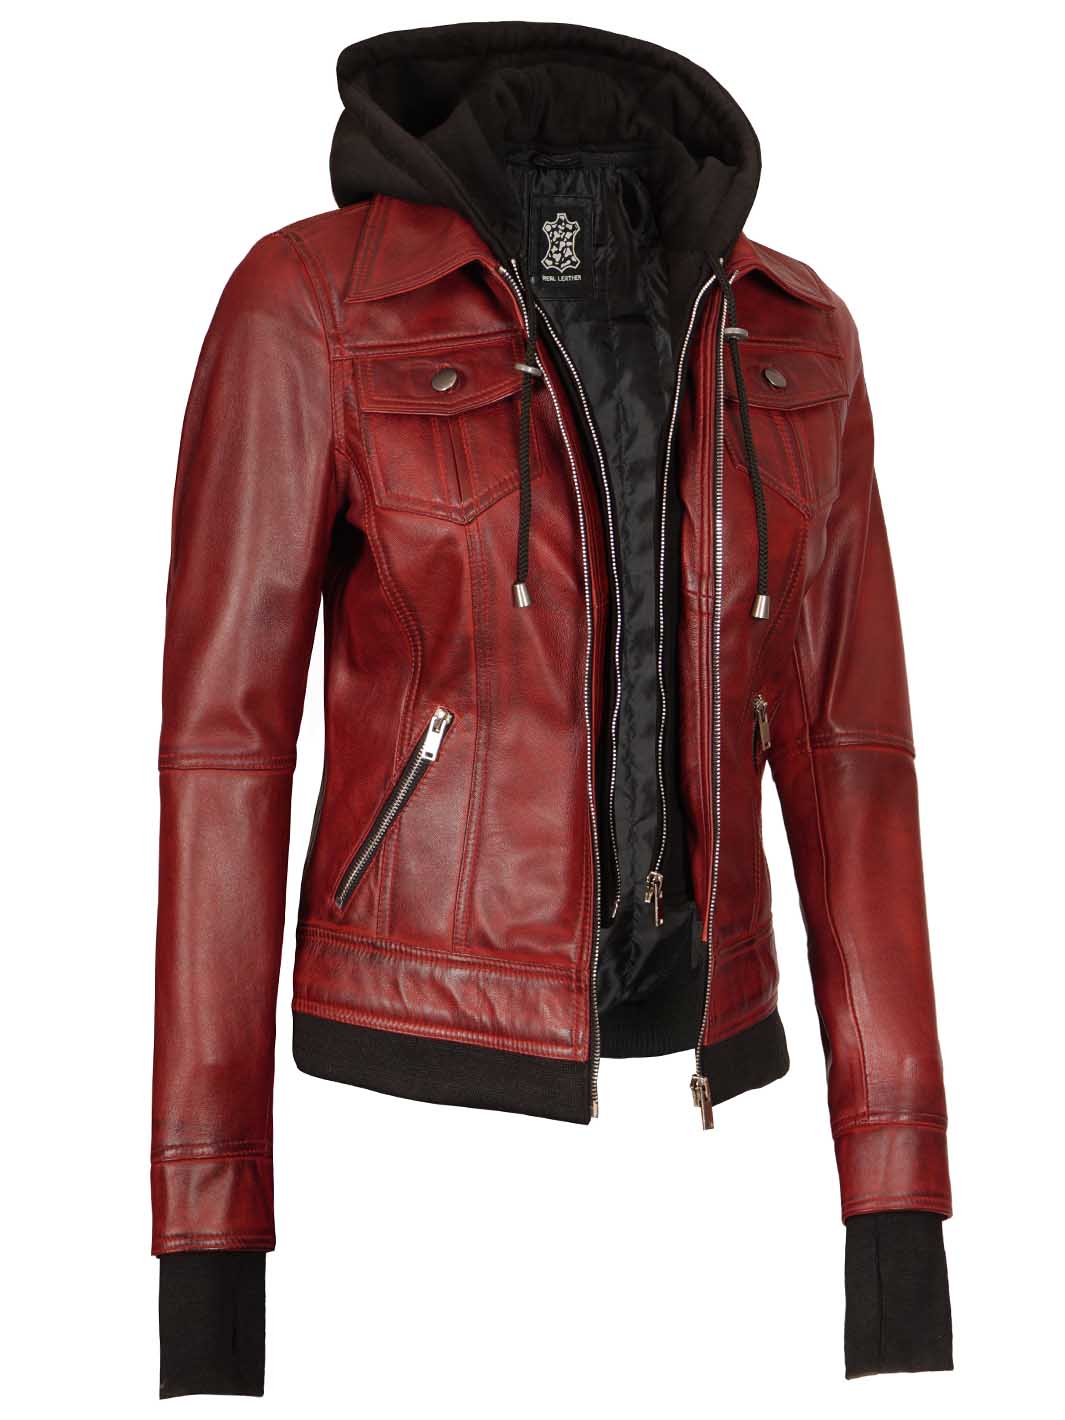 Womens maroon Leather Jacket with hood